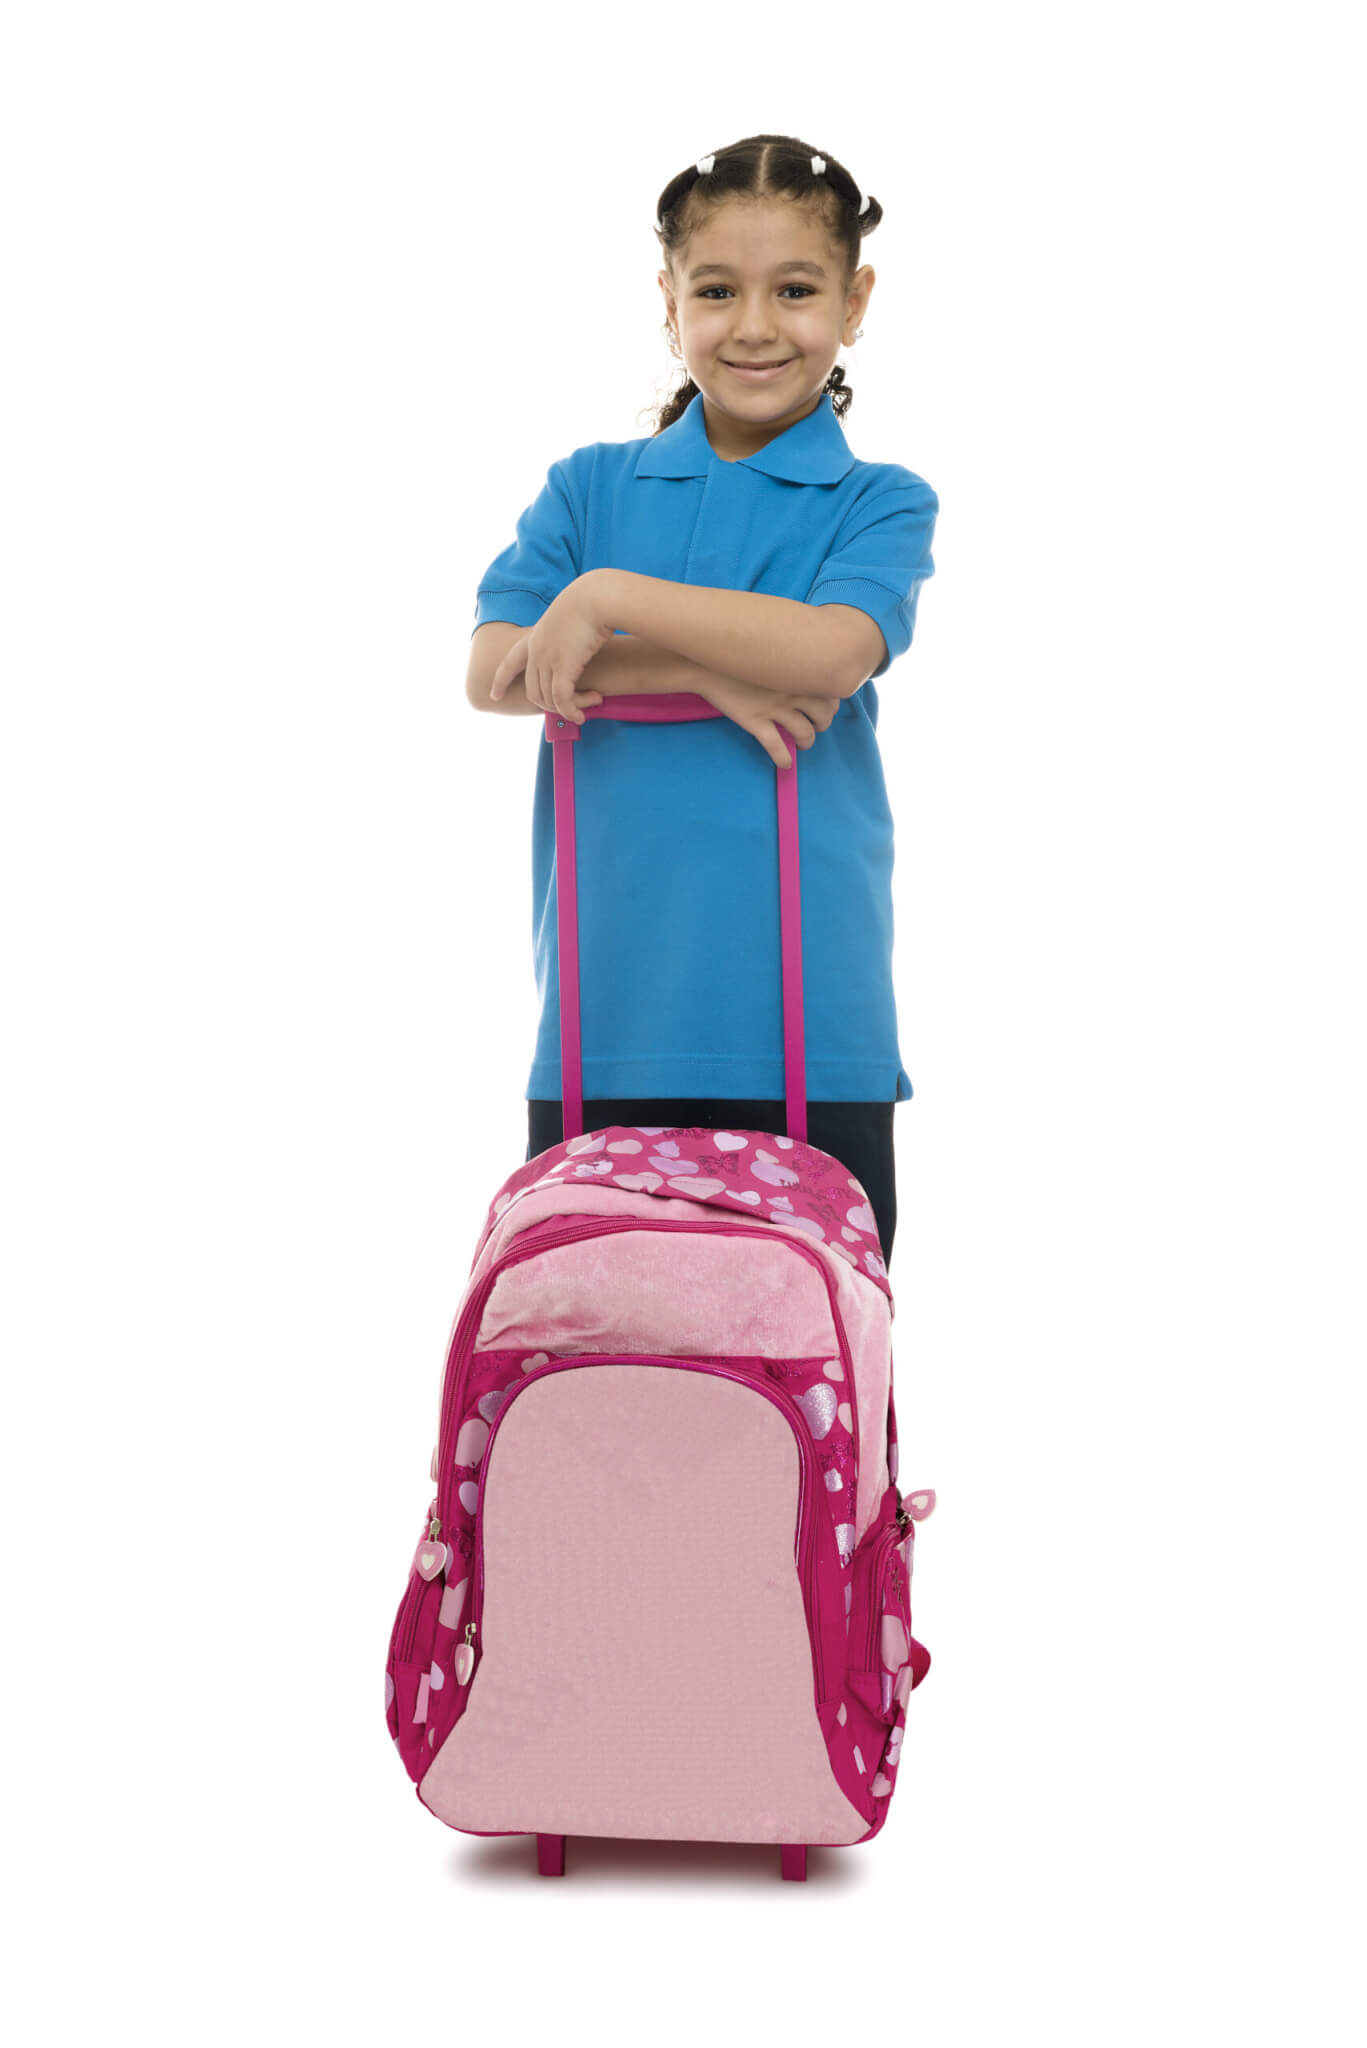 A little girl with a rolling backpack